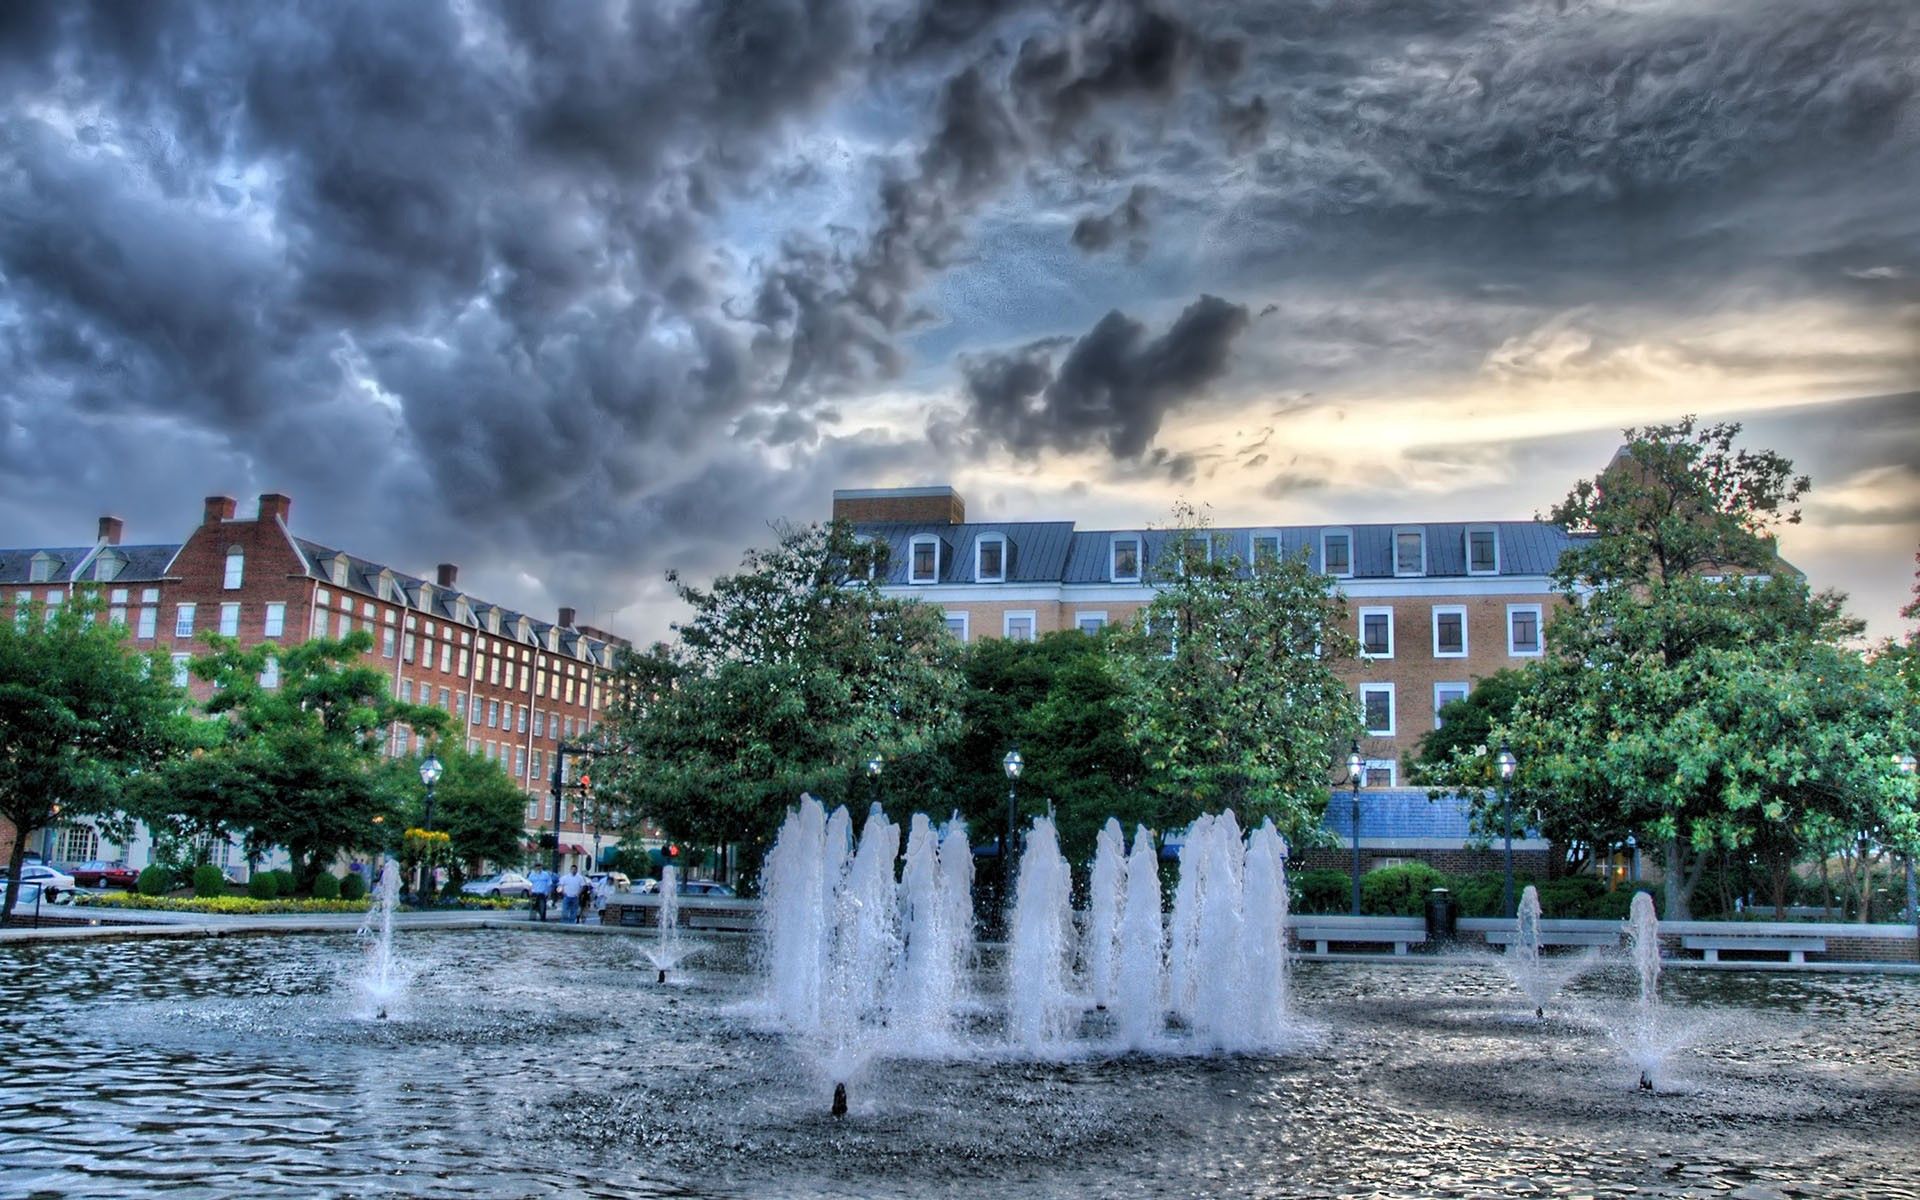 fountain, hdr, cities, water, trees, building cellphone